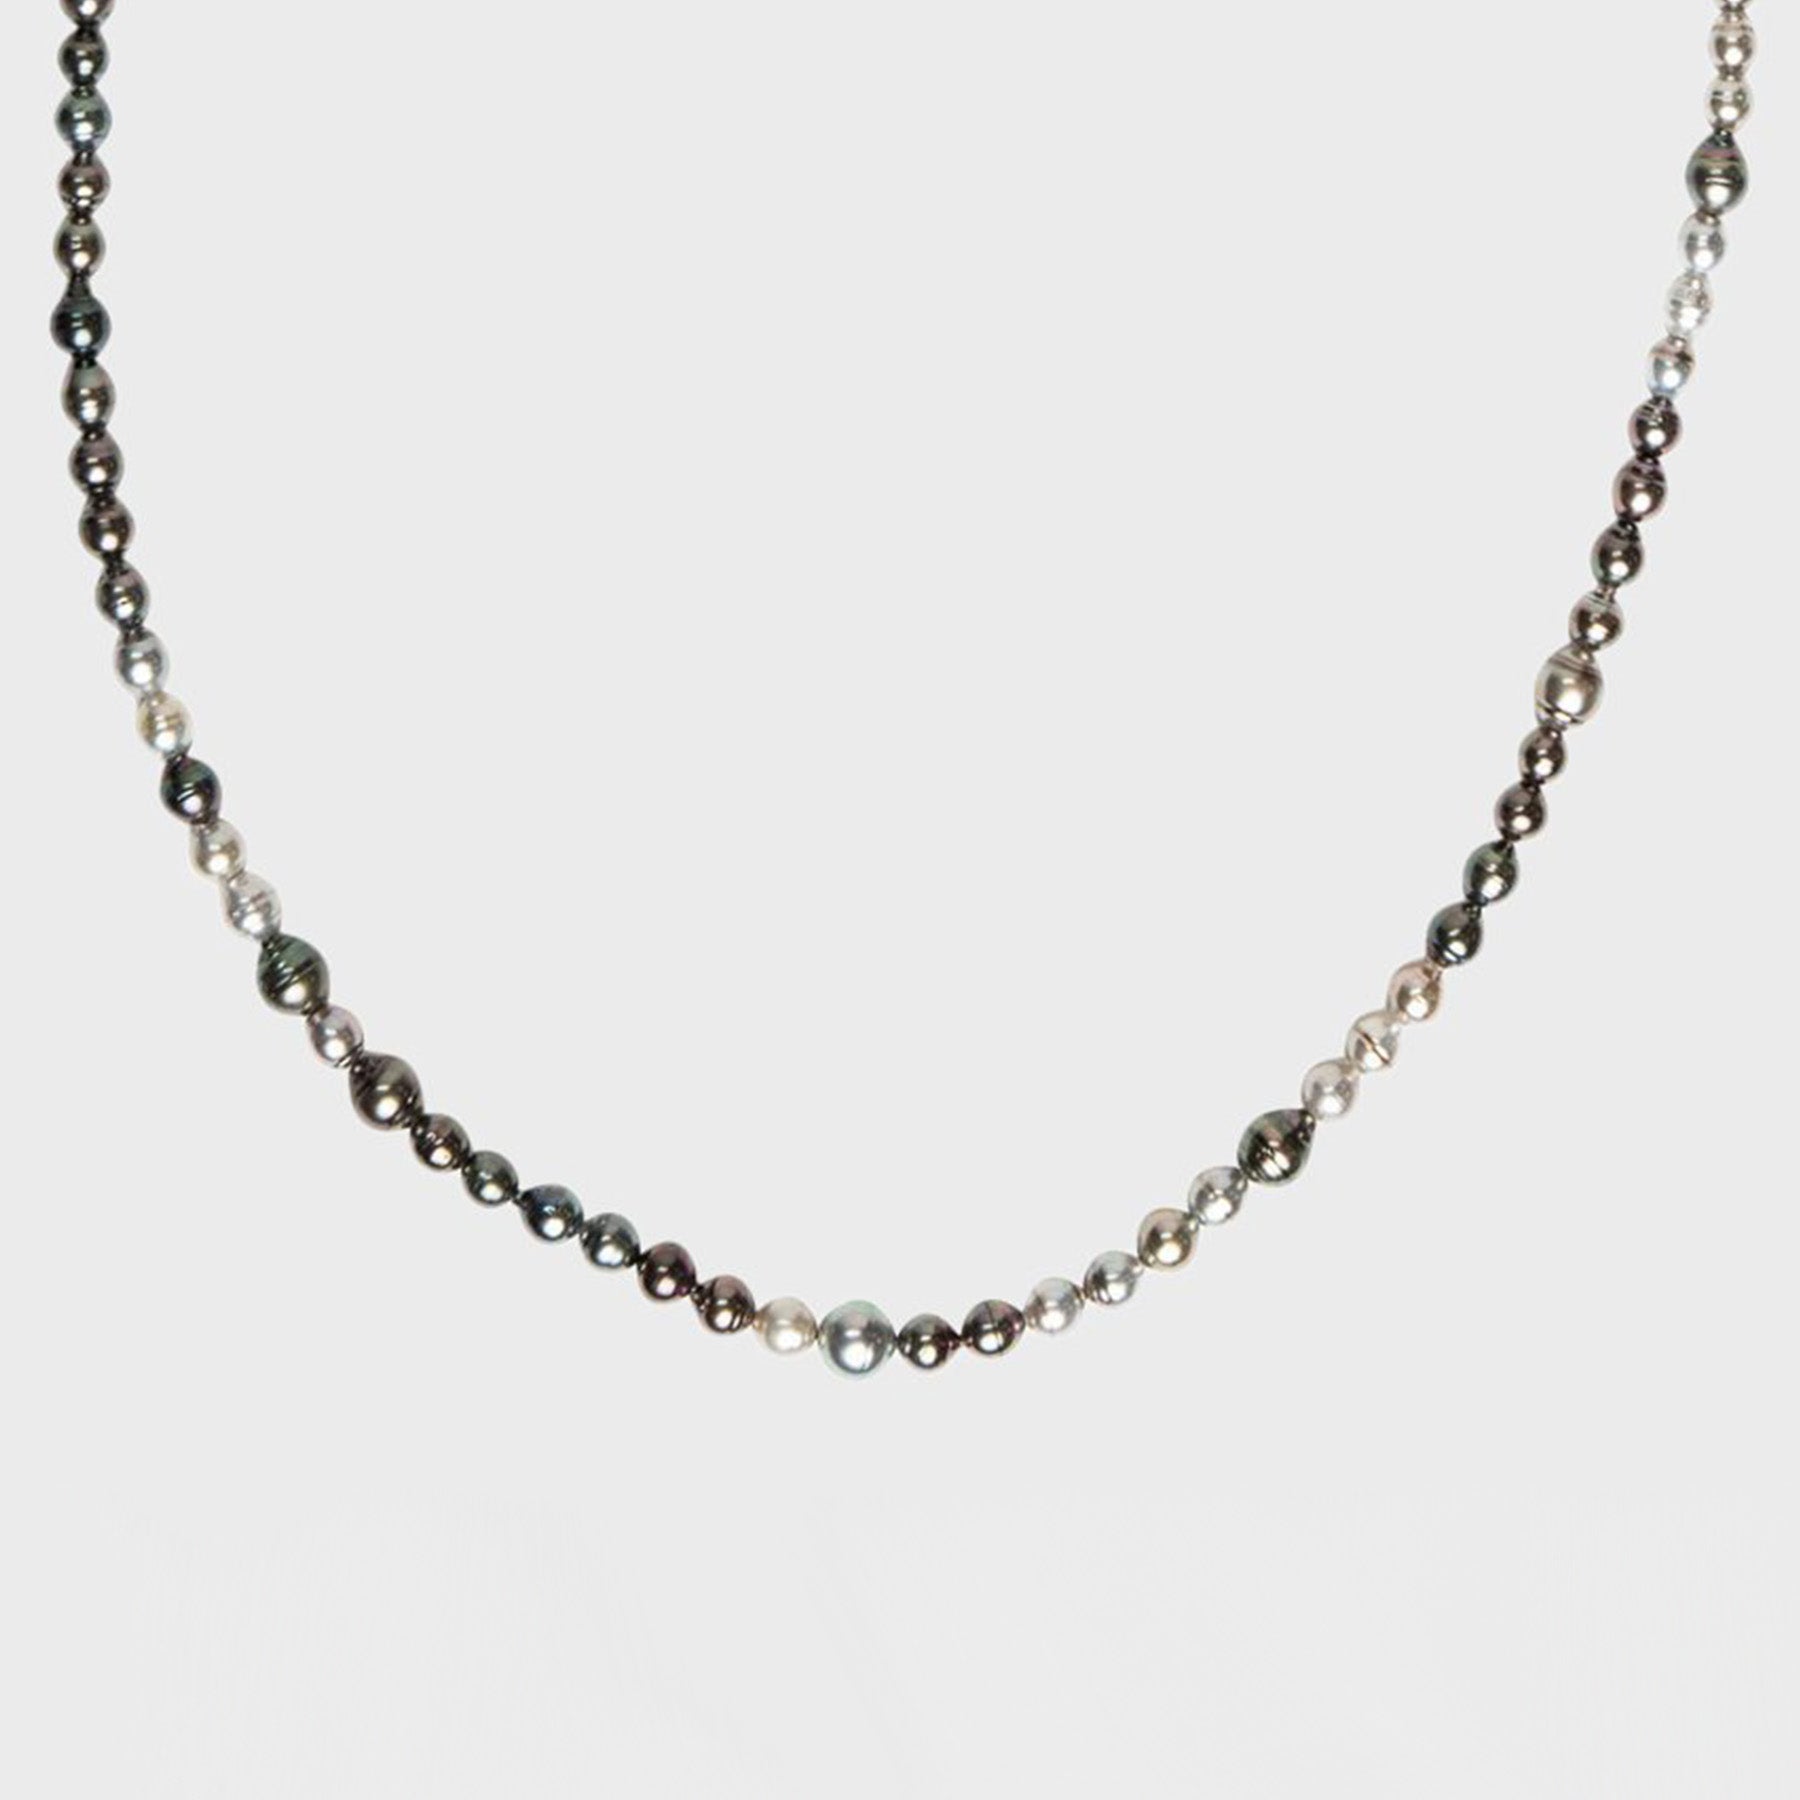 MAXFIELD PRIVATE COLLECTION | GRADIENT PEARL NECKLACE